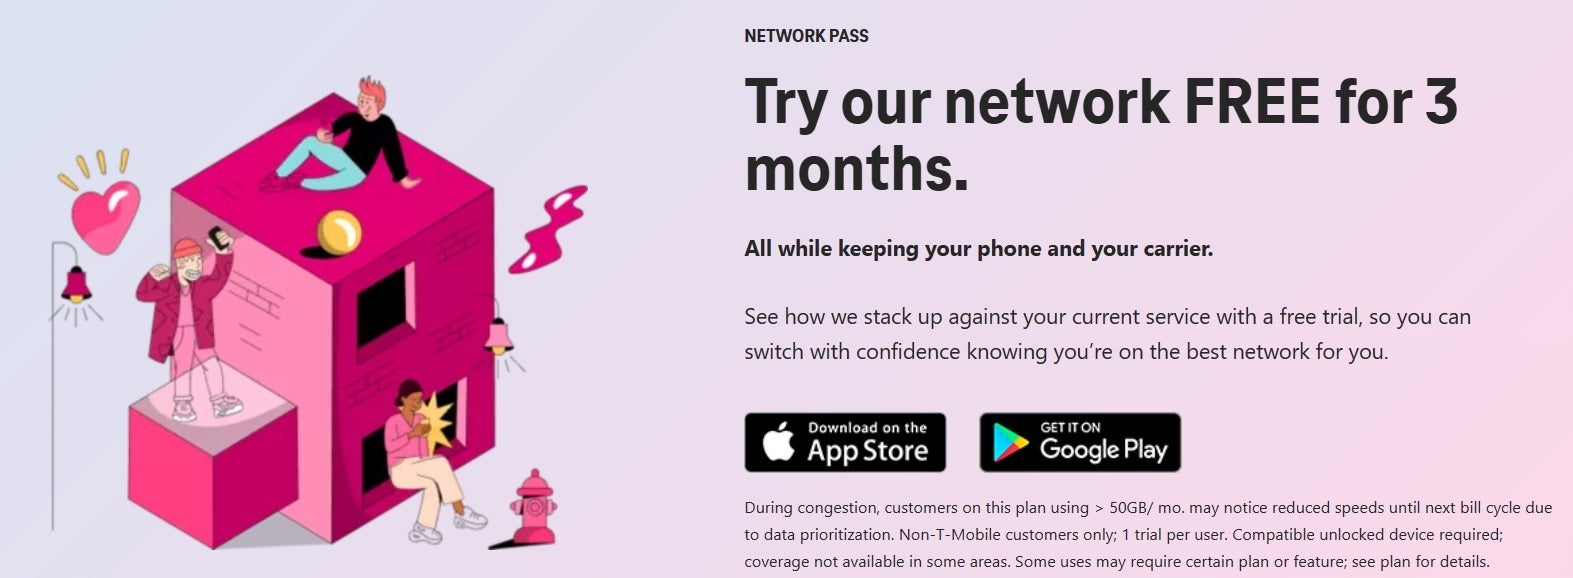 T-Mobile&#039;s Network Pass gives you up to three free months of unlimited data to try - Various wireless firms including Cricket, Visible, Verizon and T-Mobile offer free trials